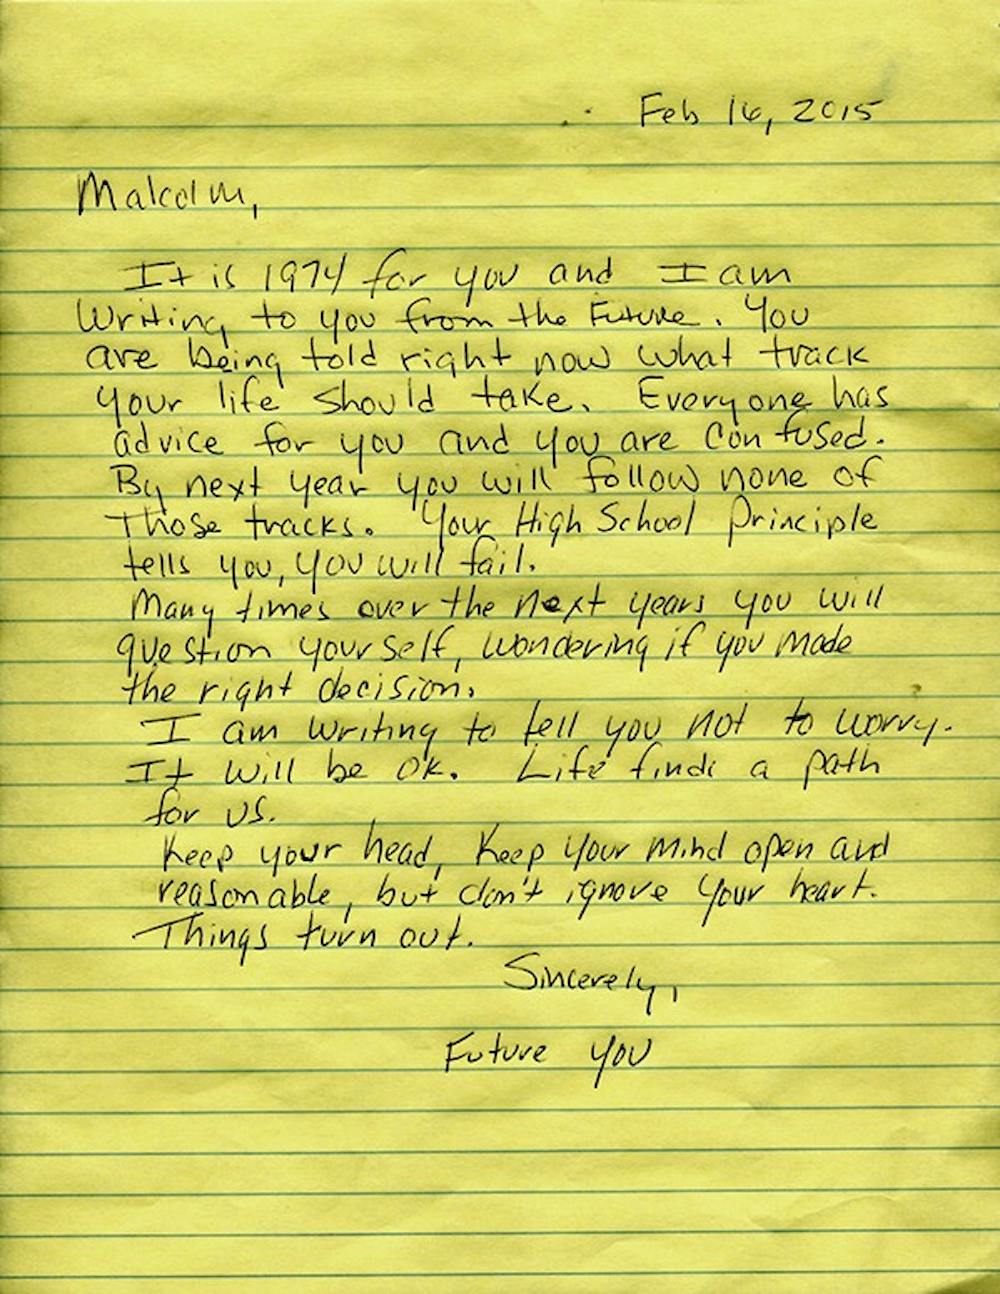 <p>Letter written by Malcolm Magee to his past self</p>